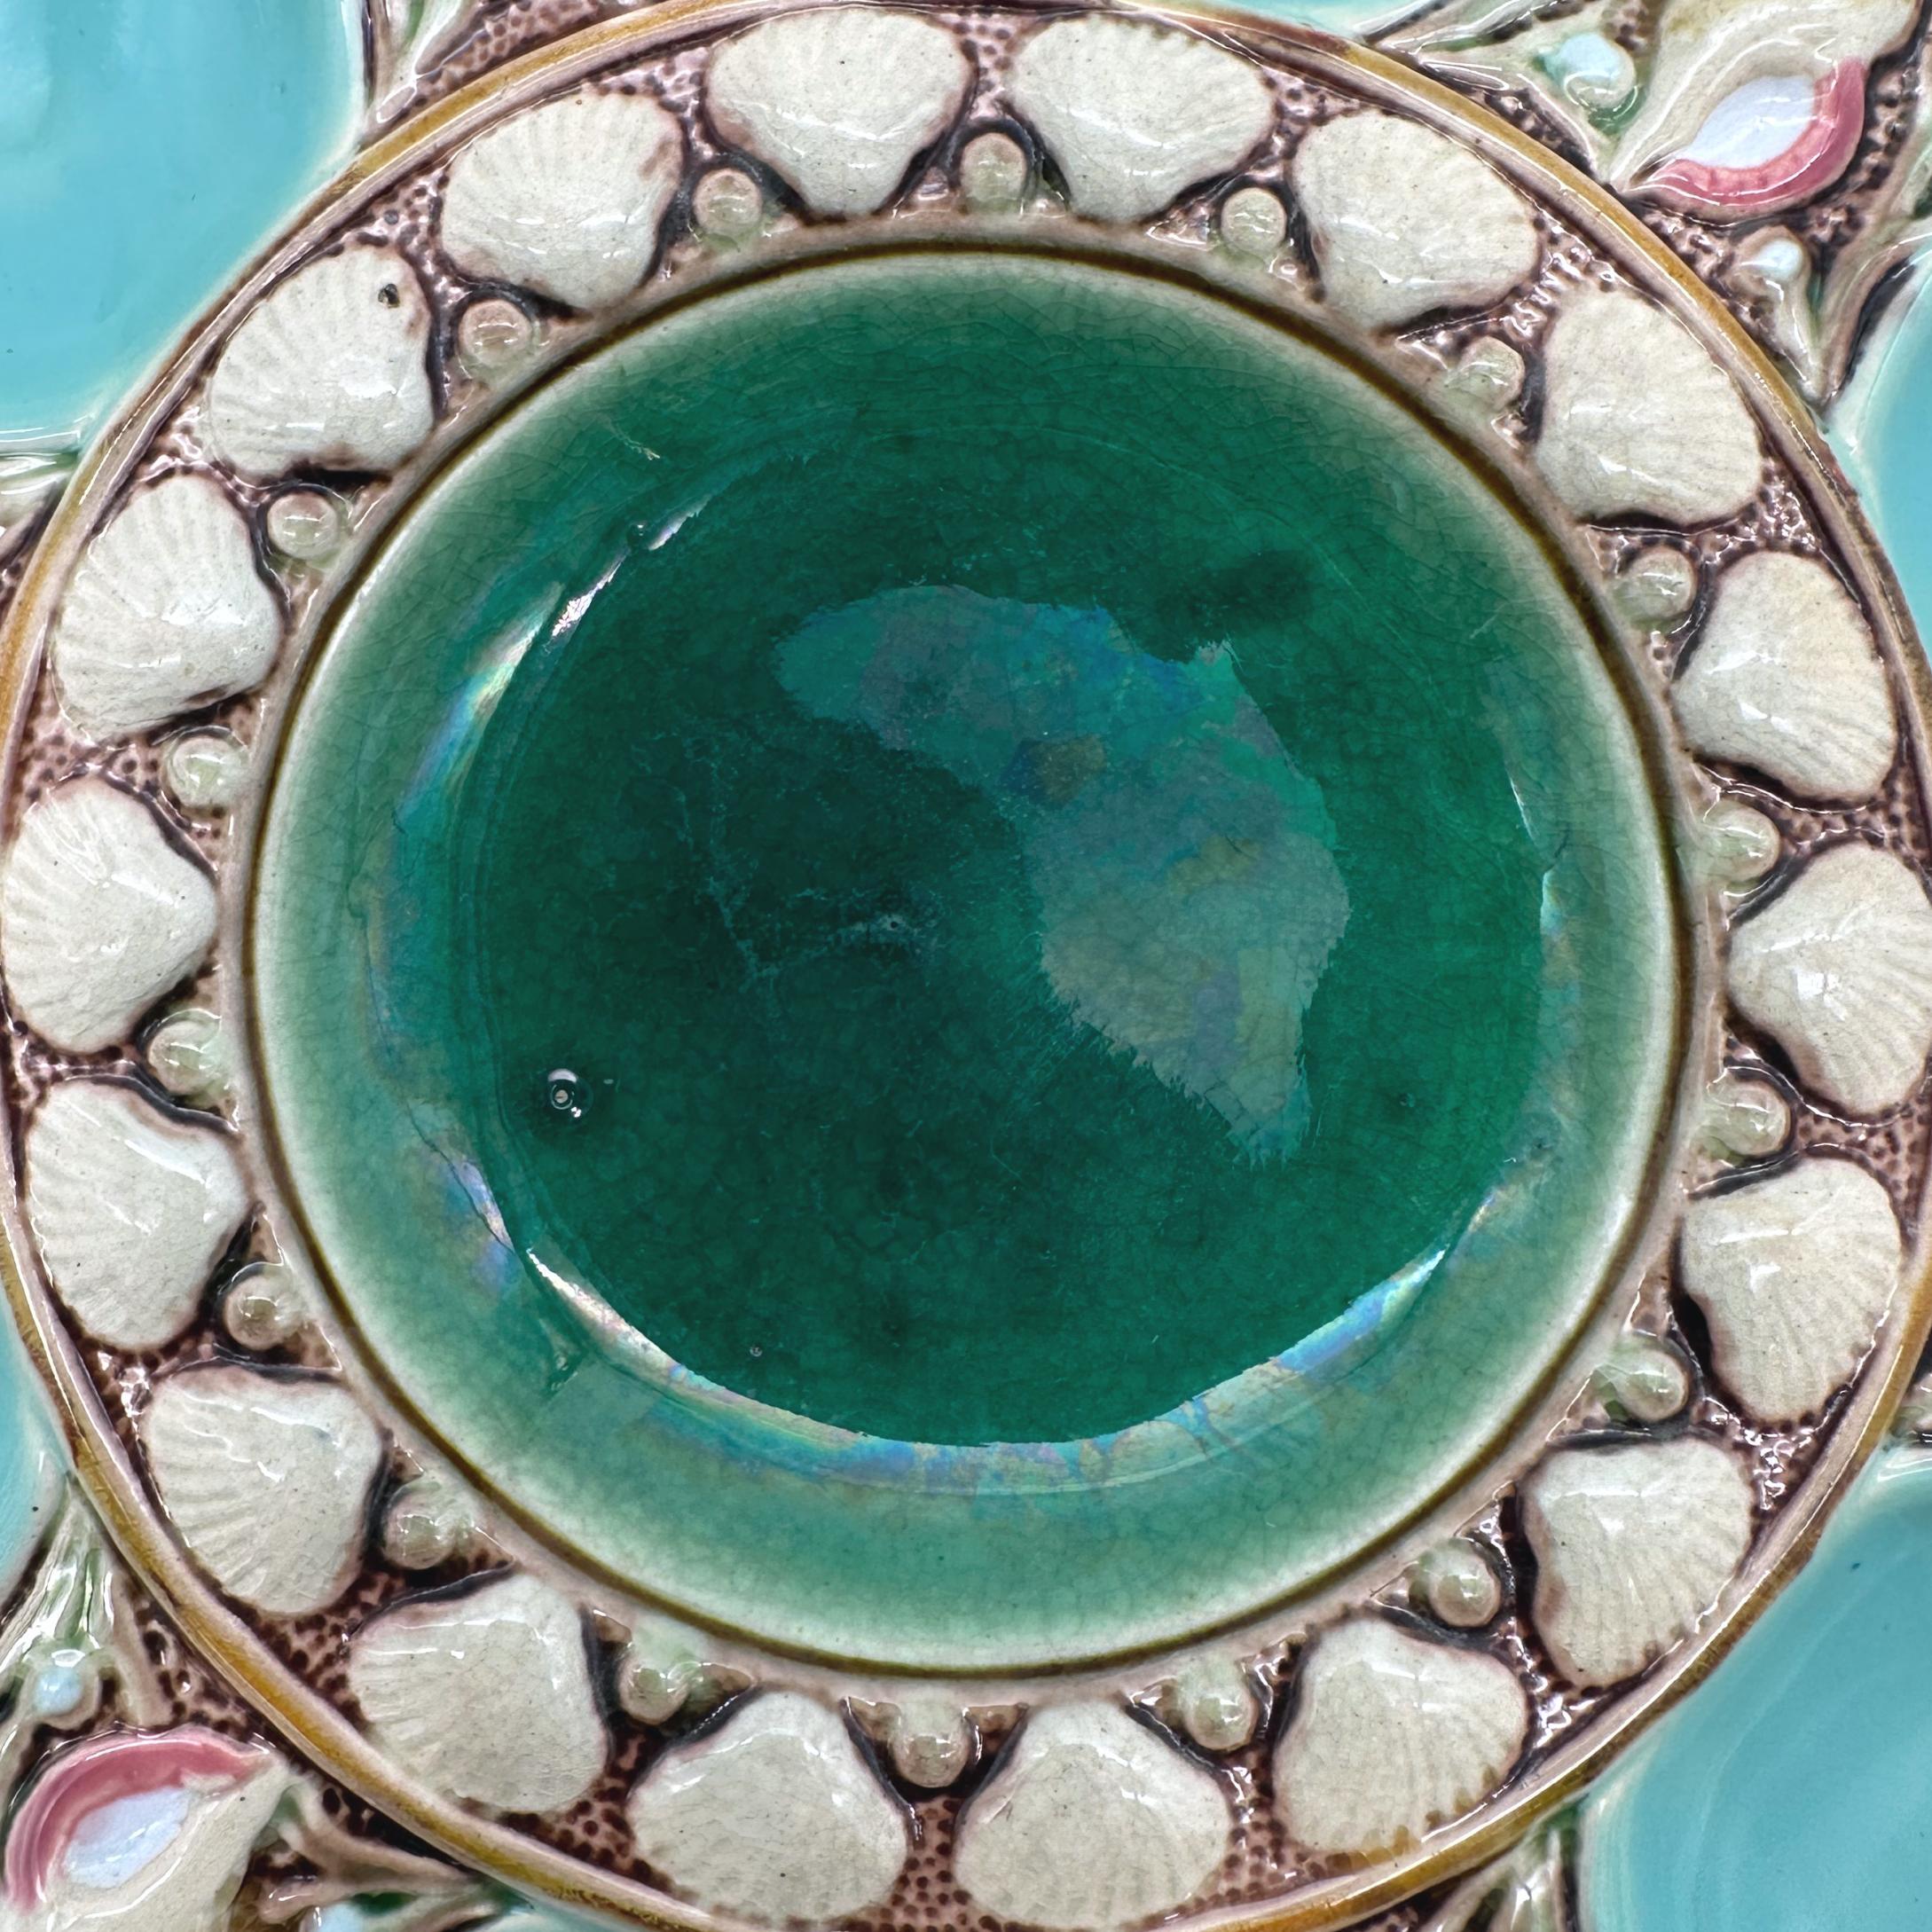 Molded Minton Majolica Seafoam Green Oyster Plate, Shells and Seaweed, Dated 1875